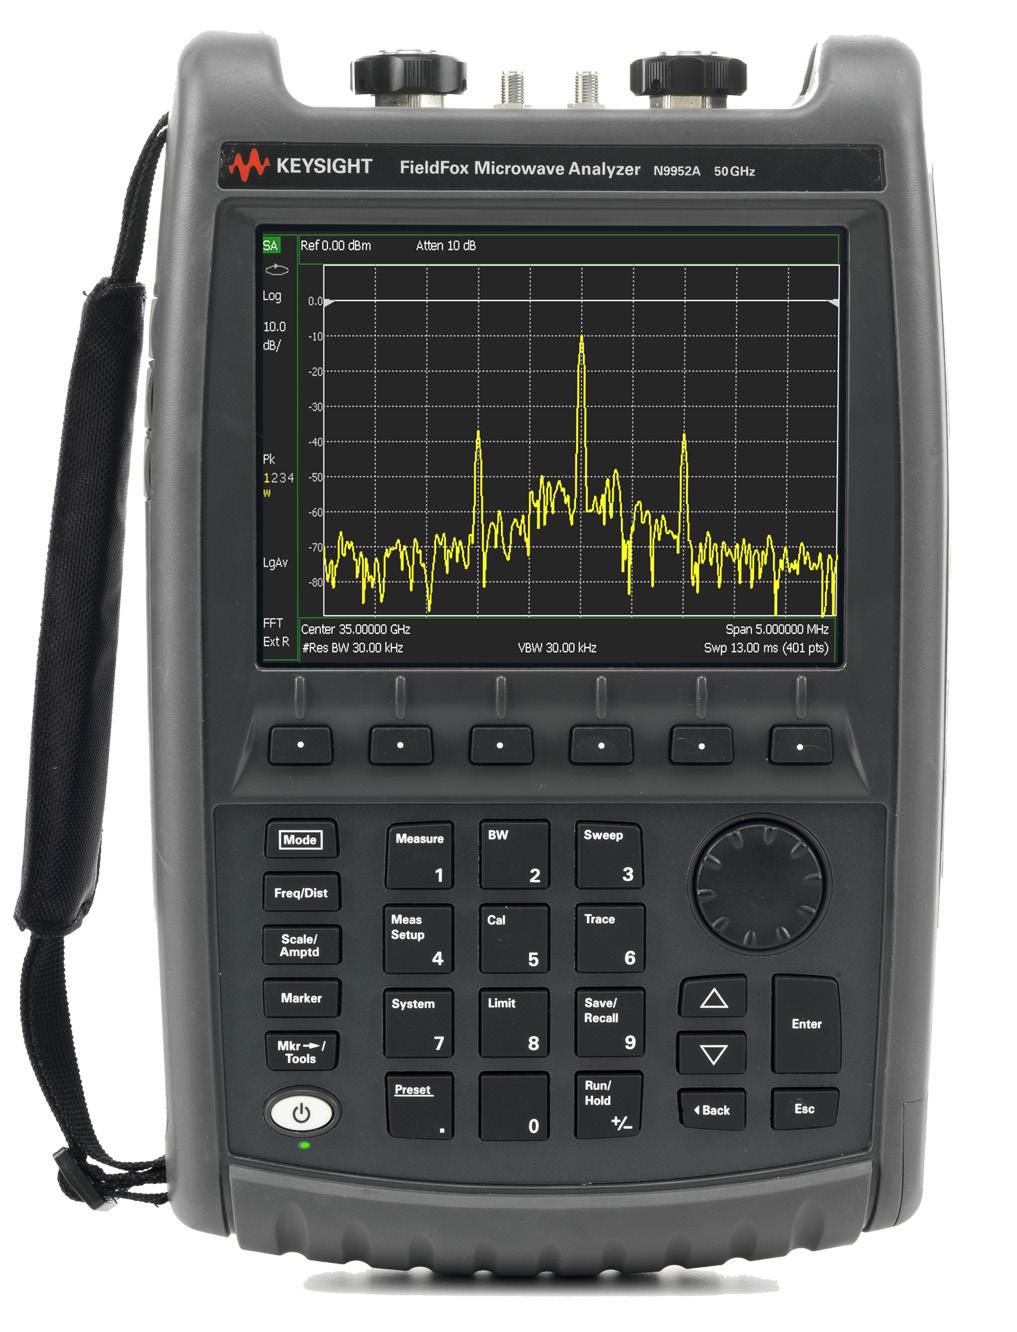 Compared to the 8565E and 8565EC, 50 GHz FieldFox spectrum analyzer offers: Equal or better